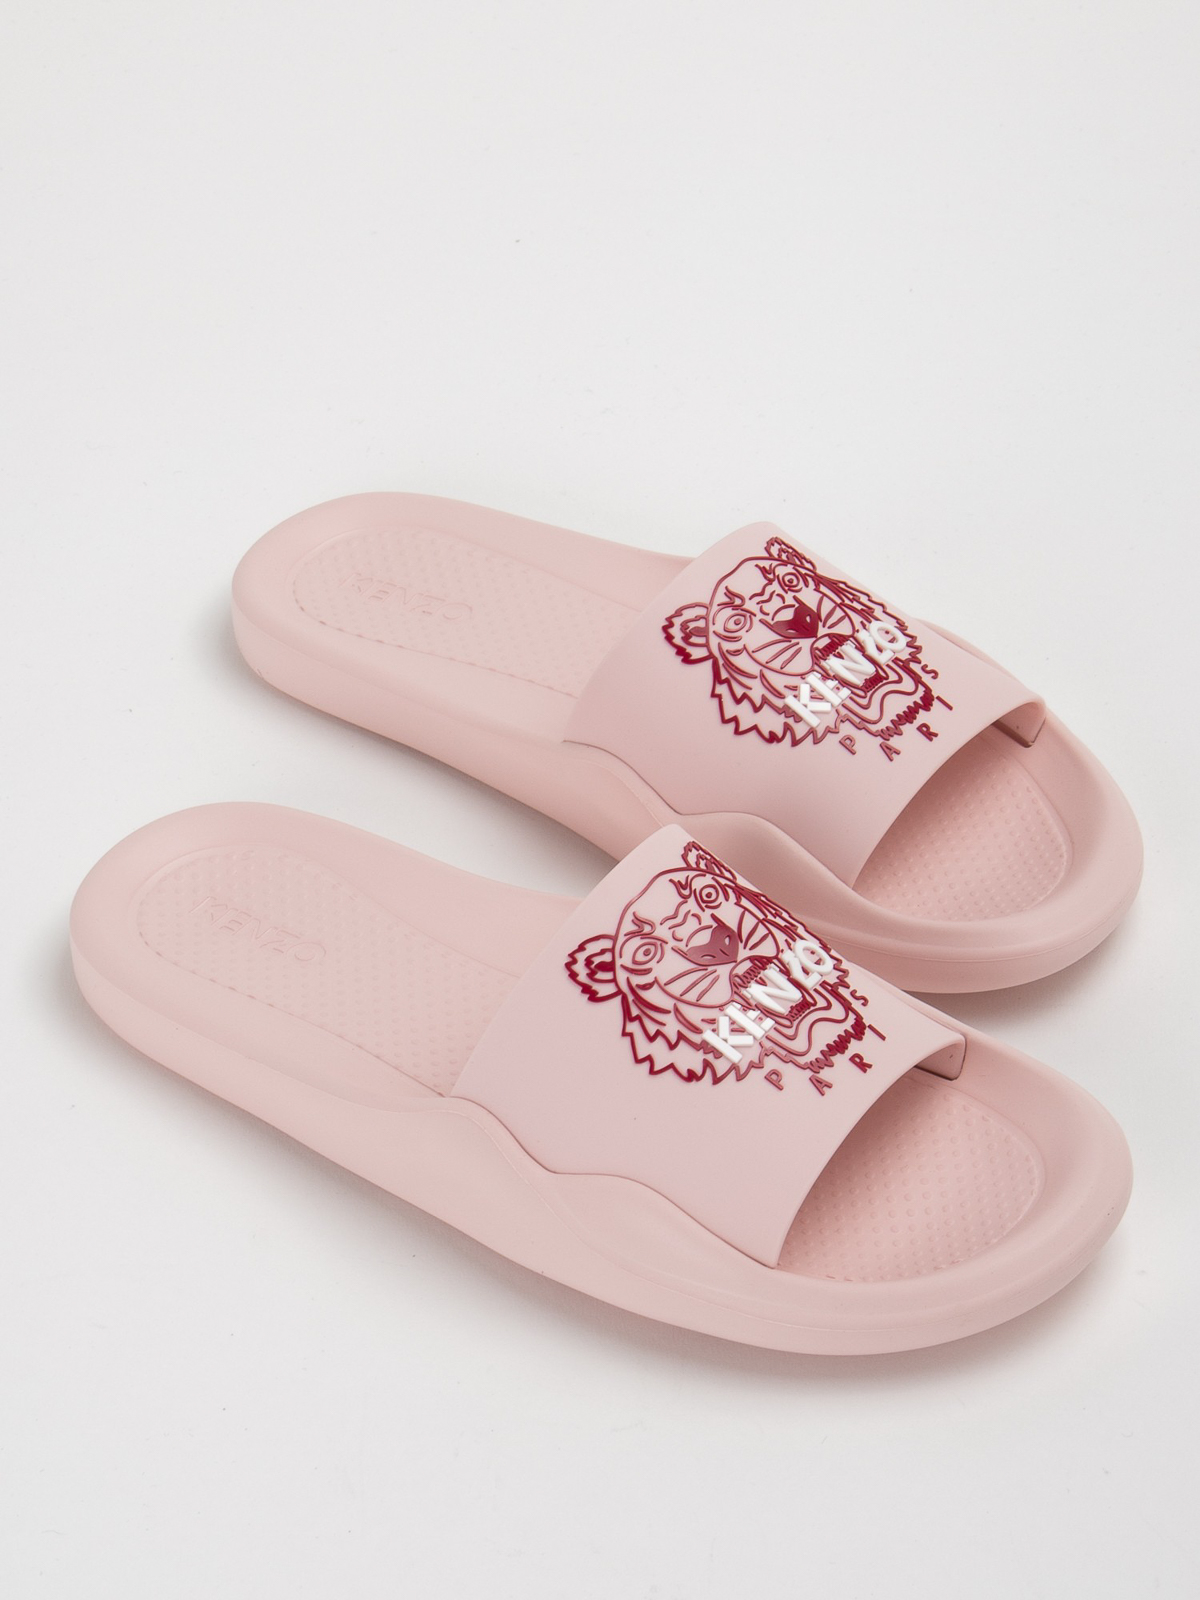 Flip flops Kenzo - THEBS Shop | - at FC52MU104P6034A Slippers online